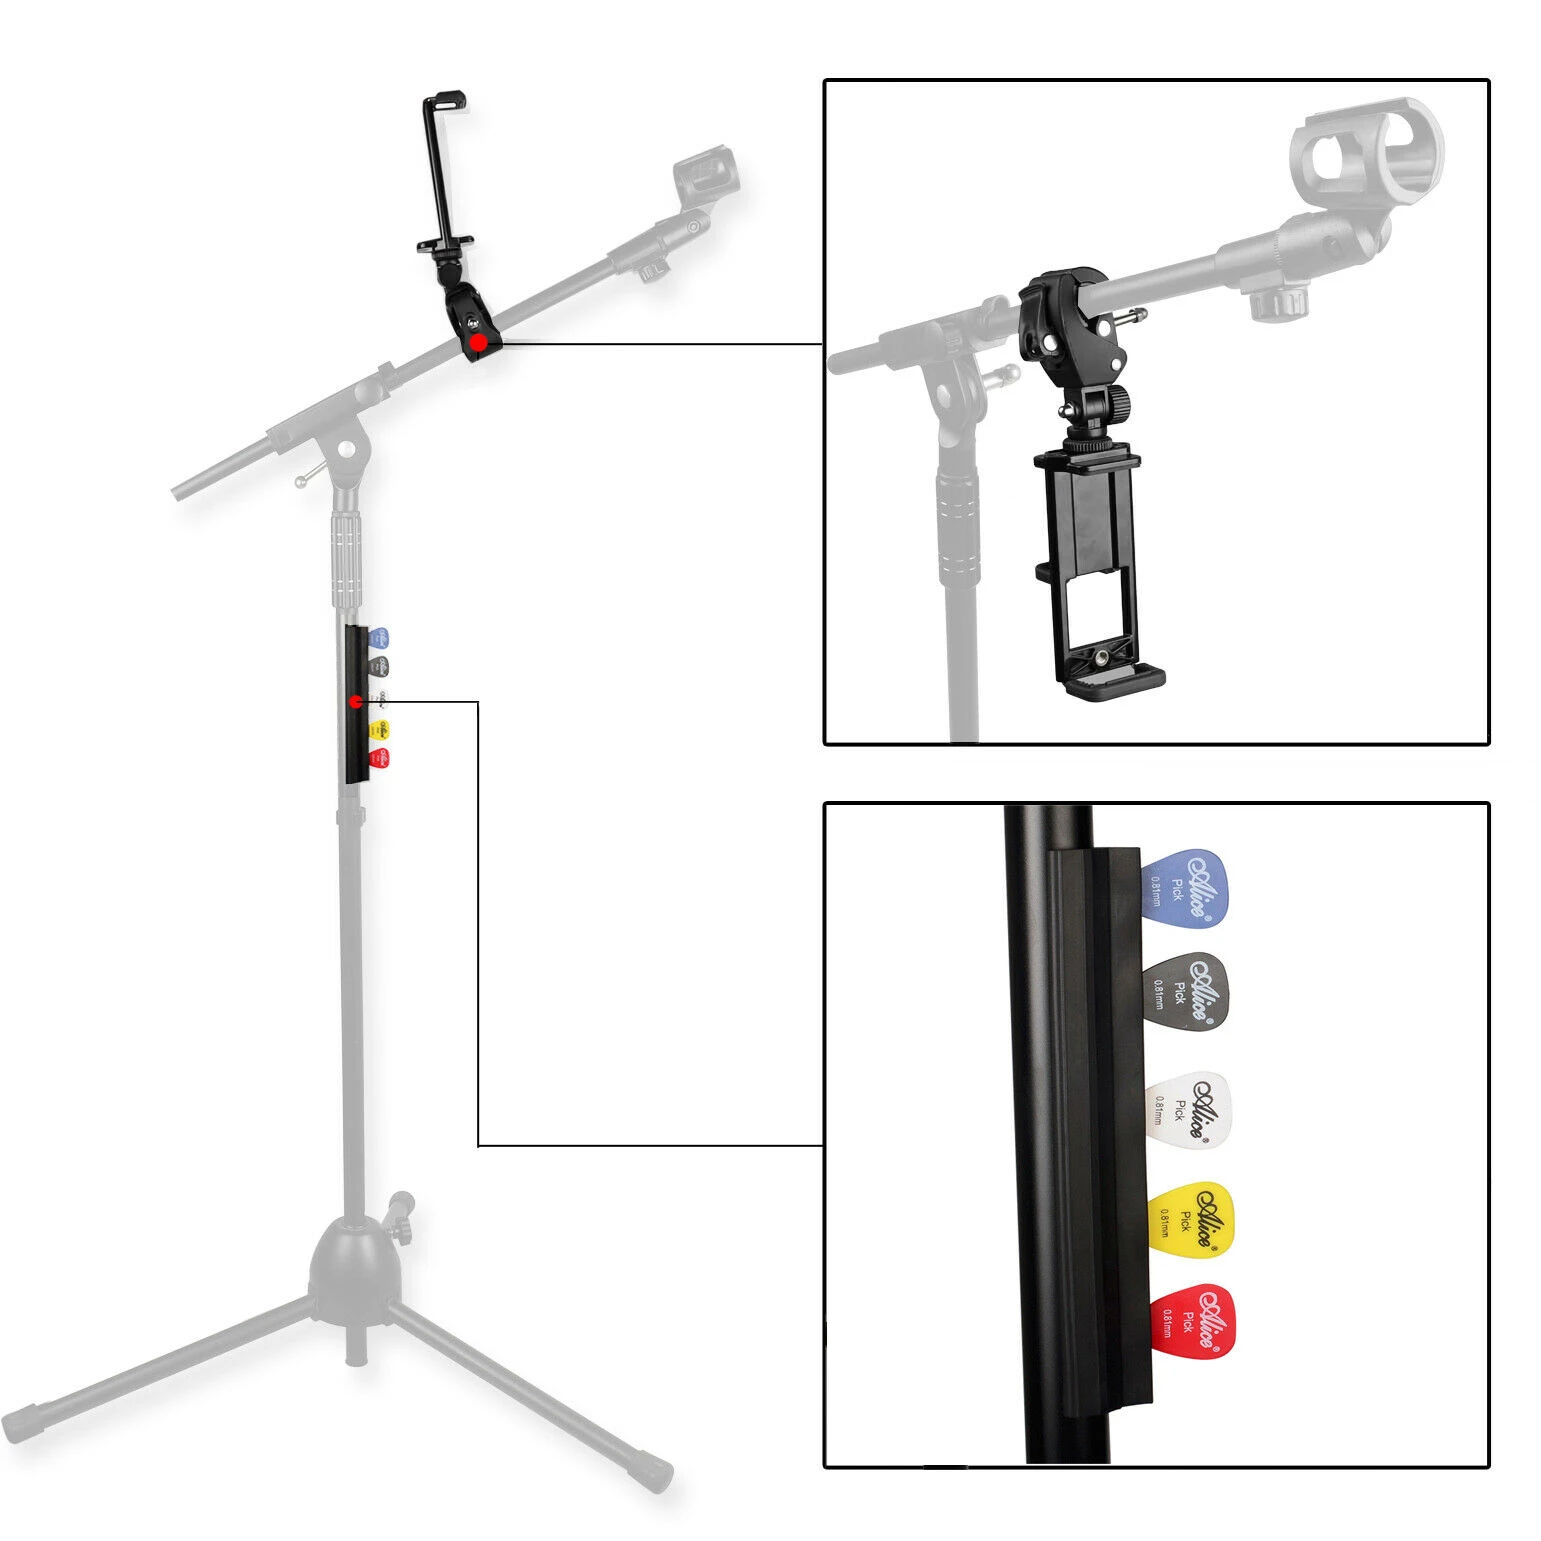 Universal Secure Music Microphone Mic Stand Holder Mount Clip & Guitar  Picks Holder for Microphone Stand|Guitar Parts & Accessories| - AliExpress